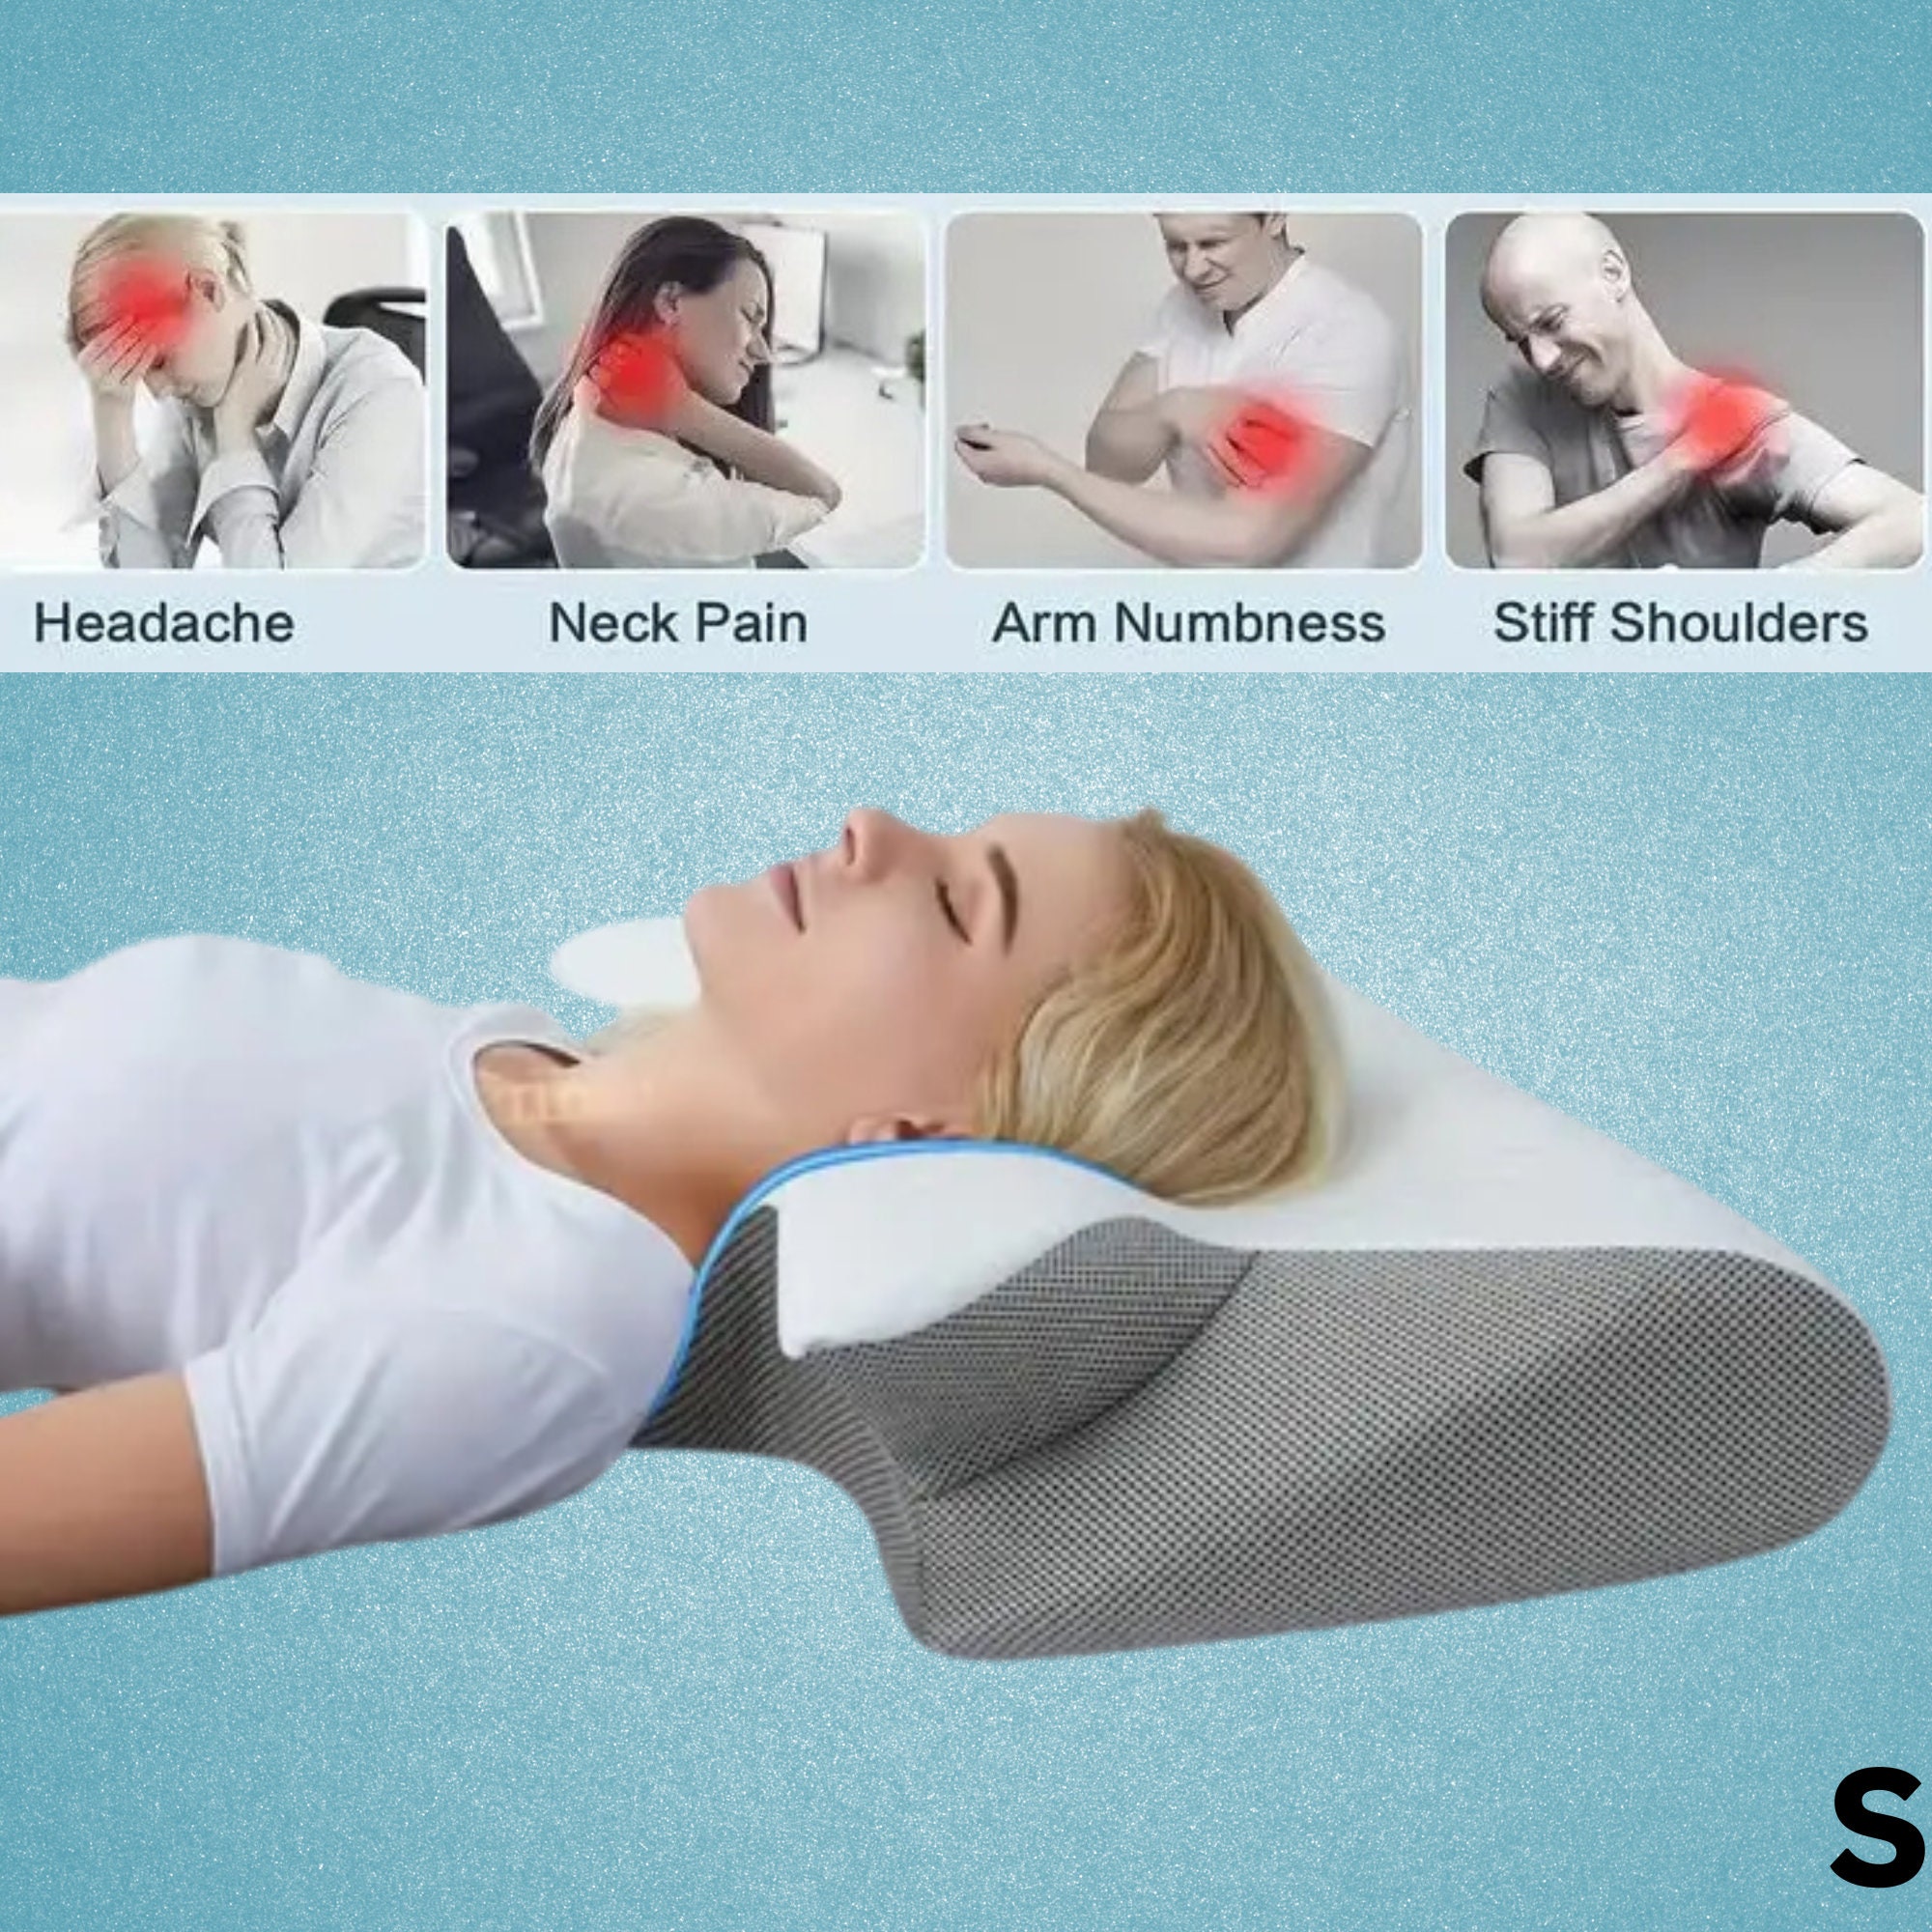 Award-winning Chiropractic Pillow With Strong Side & Back Support, S M L  Blue, Neck Pain Relief Cervical Cushion, Car Bus Airplane Recliner 